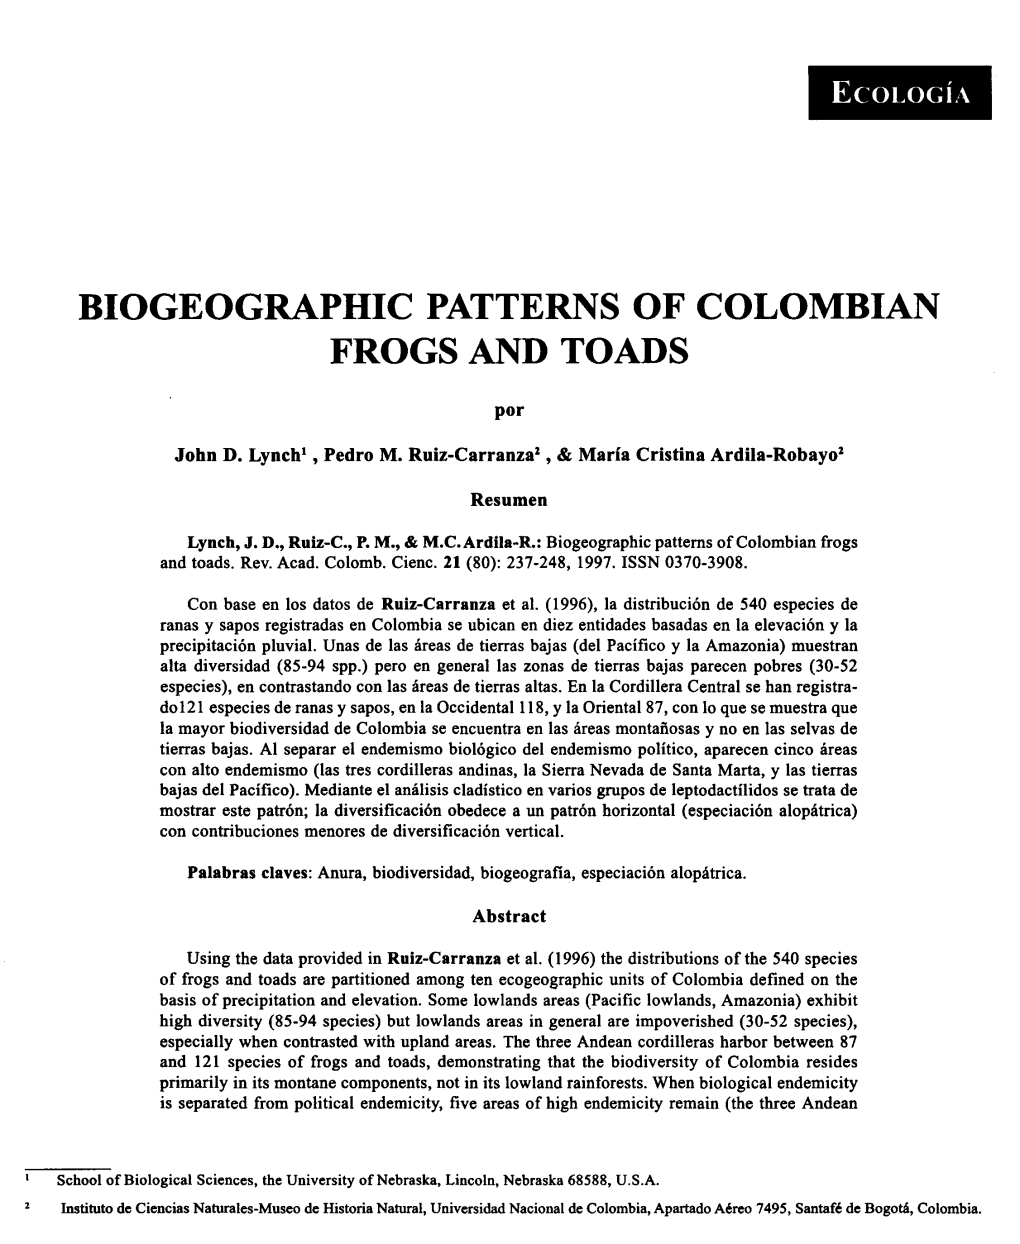 Biogeographic Patterns of Colombian Frogs and Toads